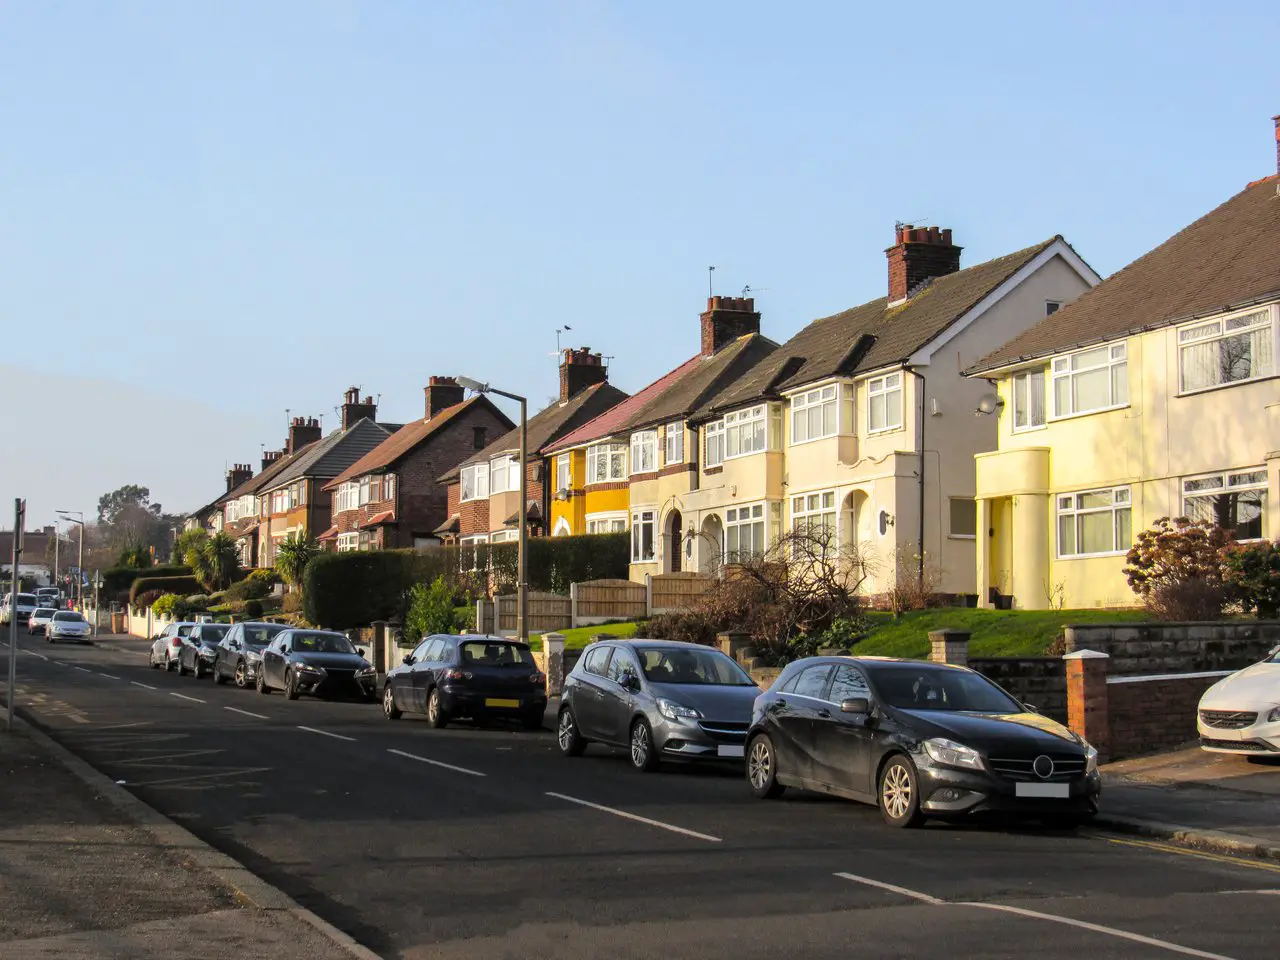 A street of semi-detached houses in Liverpool. Since the Liverpool cost of living is lower than London, you can get a far bigger house for your money.